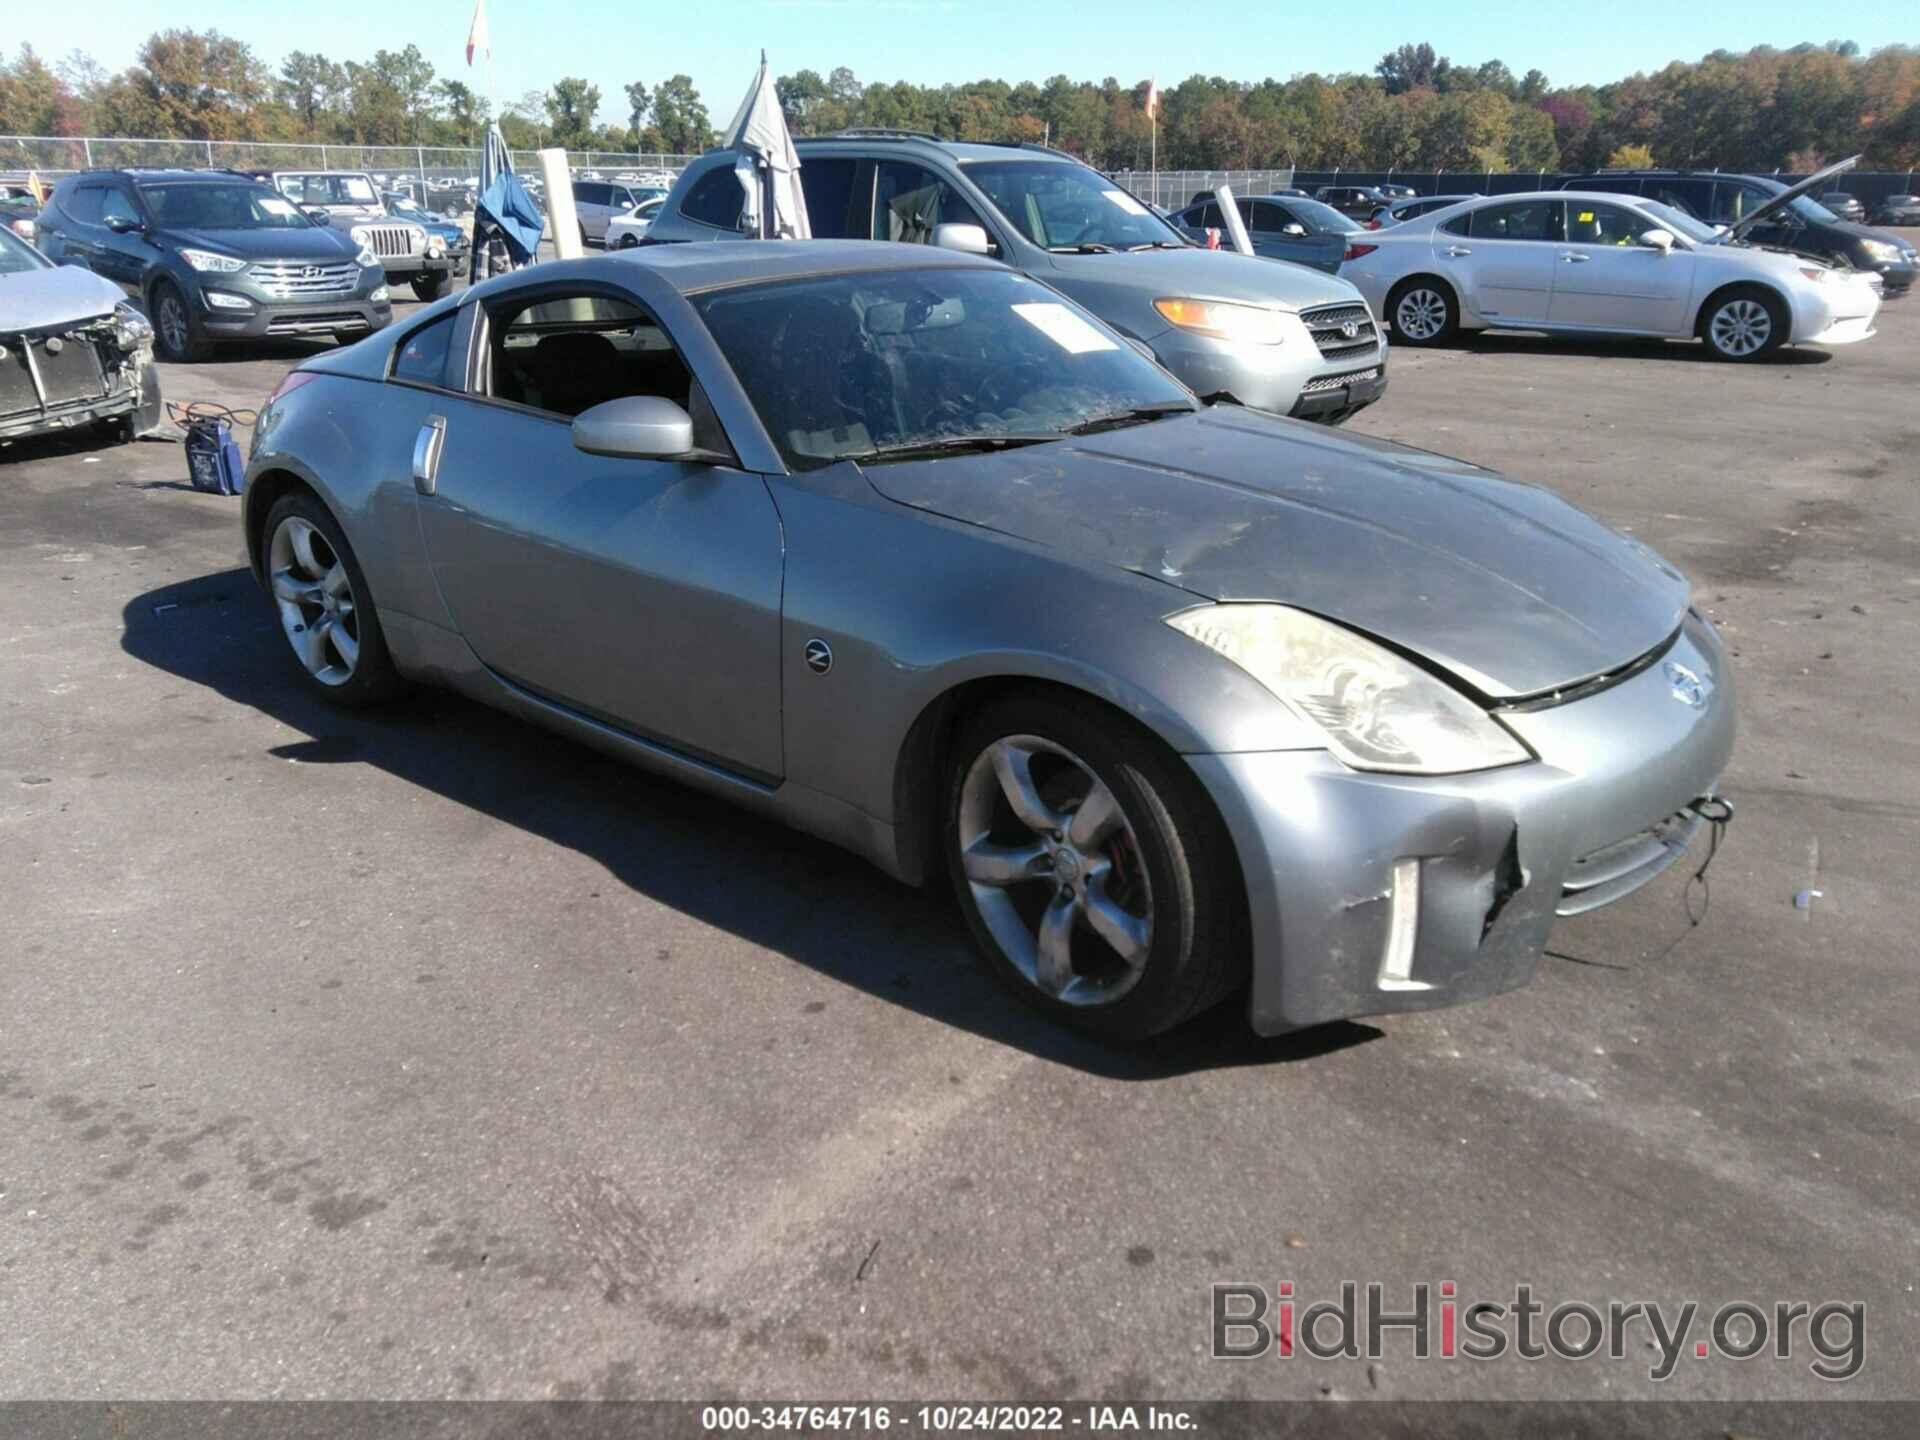 View NISSAN 350Z history at insurance auctions Copart and IAAI 